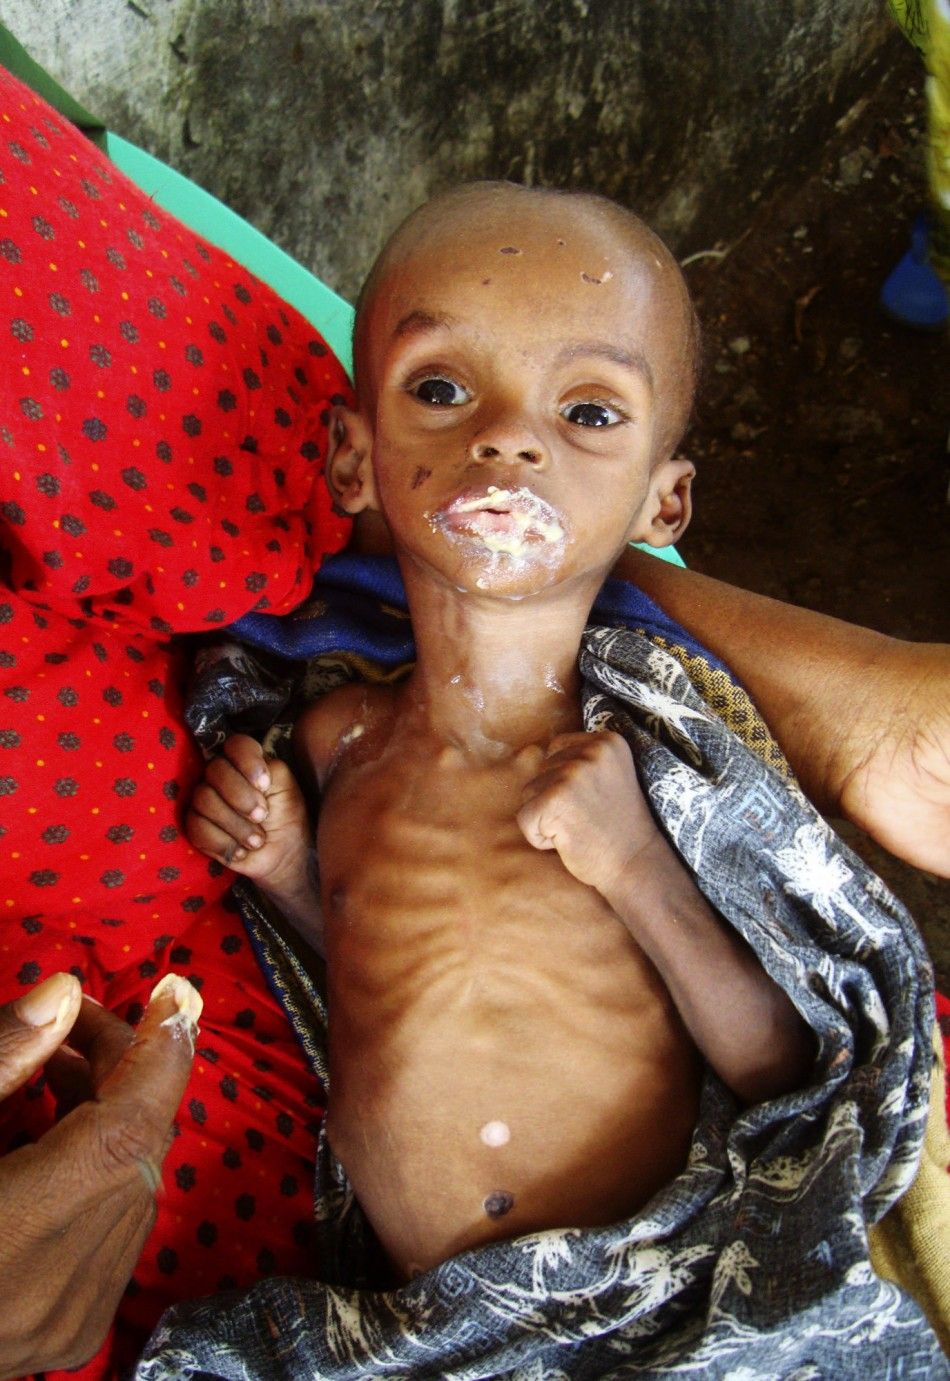 Millions of Malnourished Children in Horn of Africa are at Risk of Dying